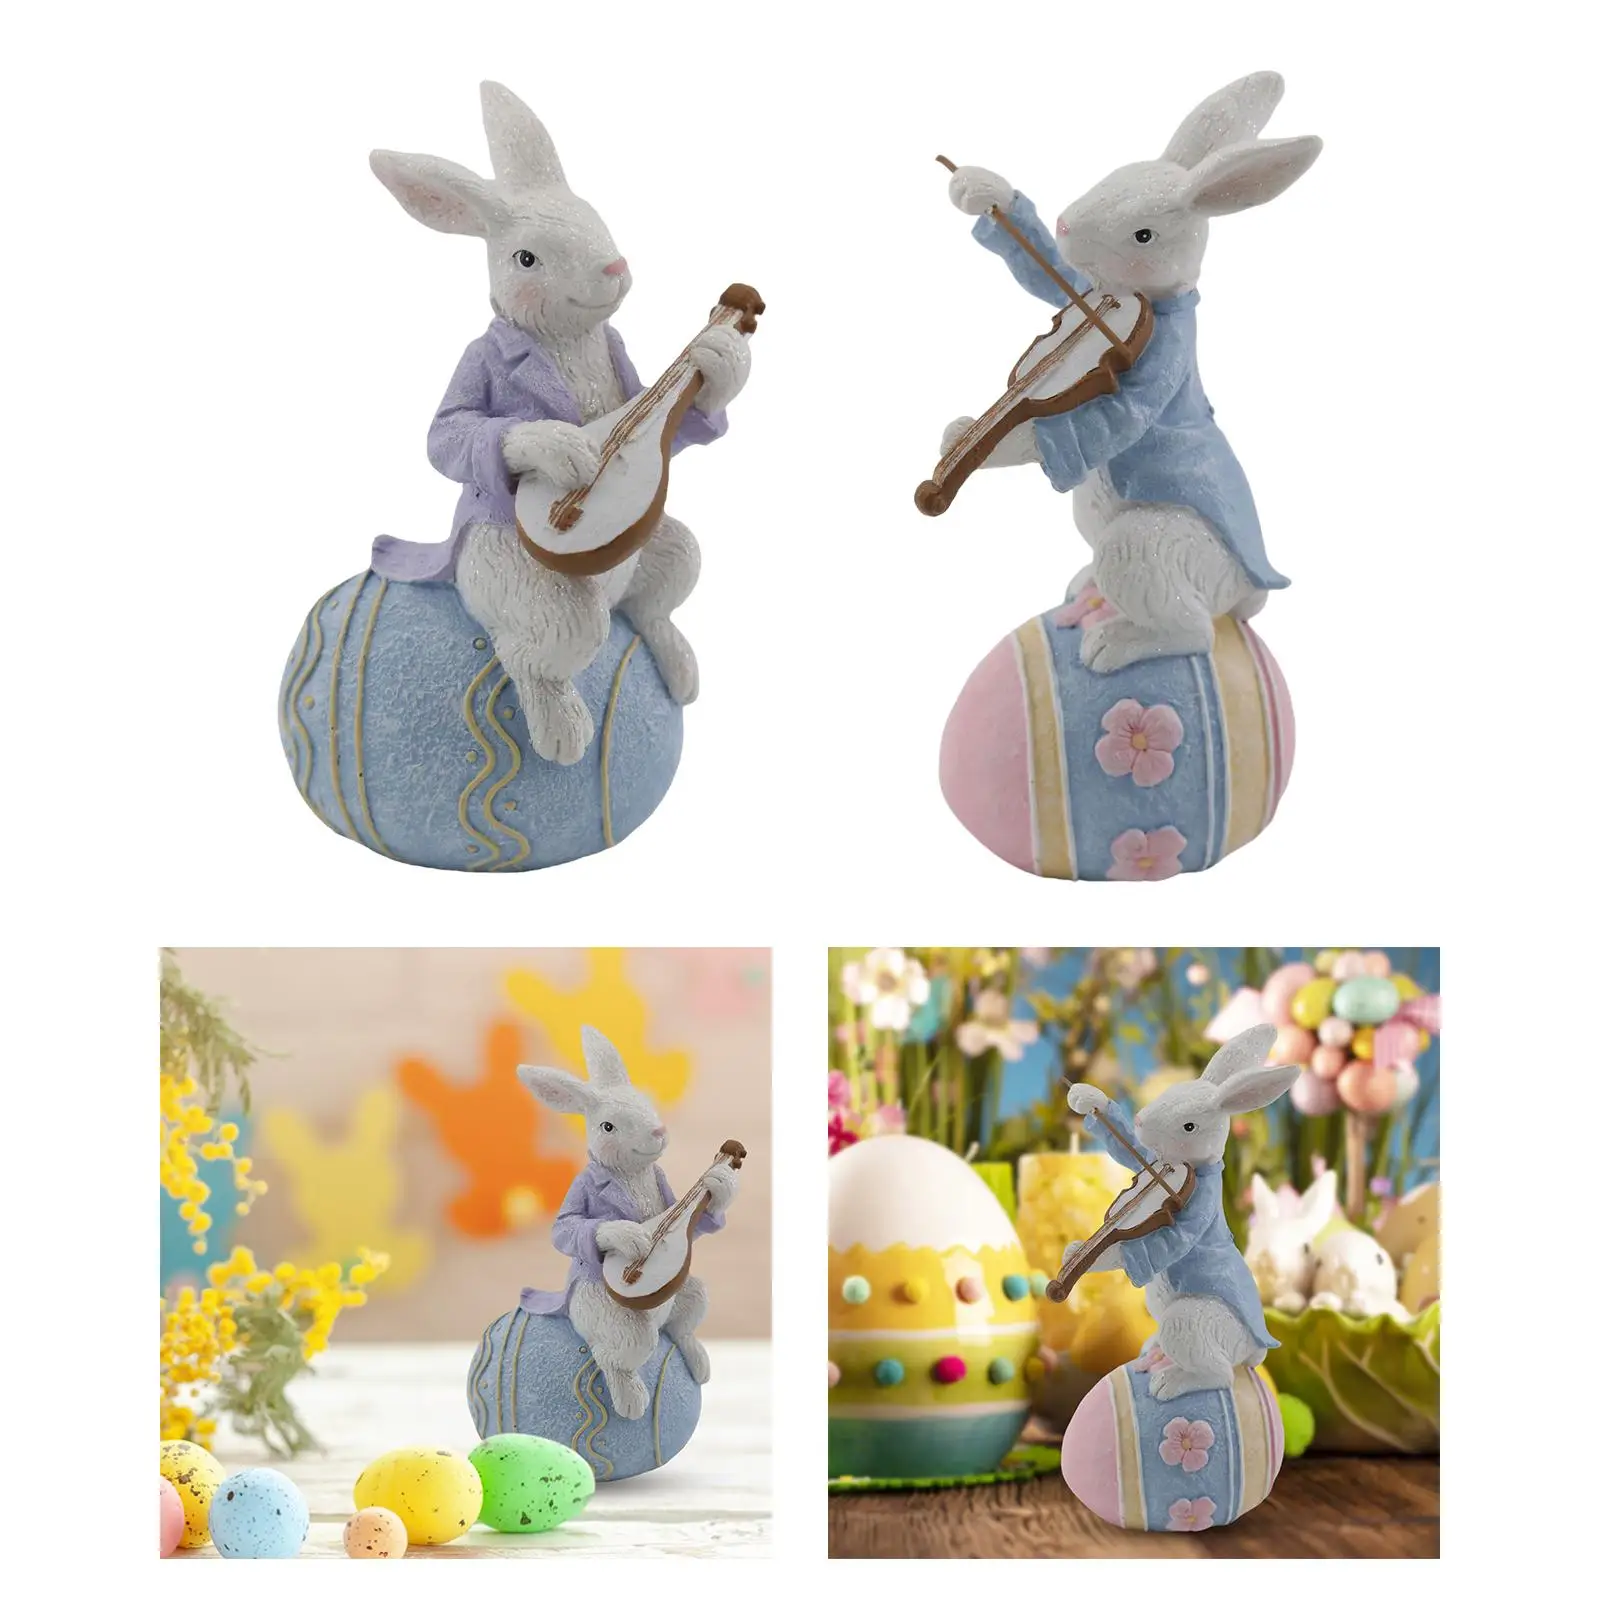 Funny Easter Rabbit Spring Easter Decor Centerpiece Figurine Sculpture Statue for Holiday Home Party Collectibles Decoration